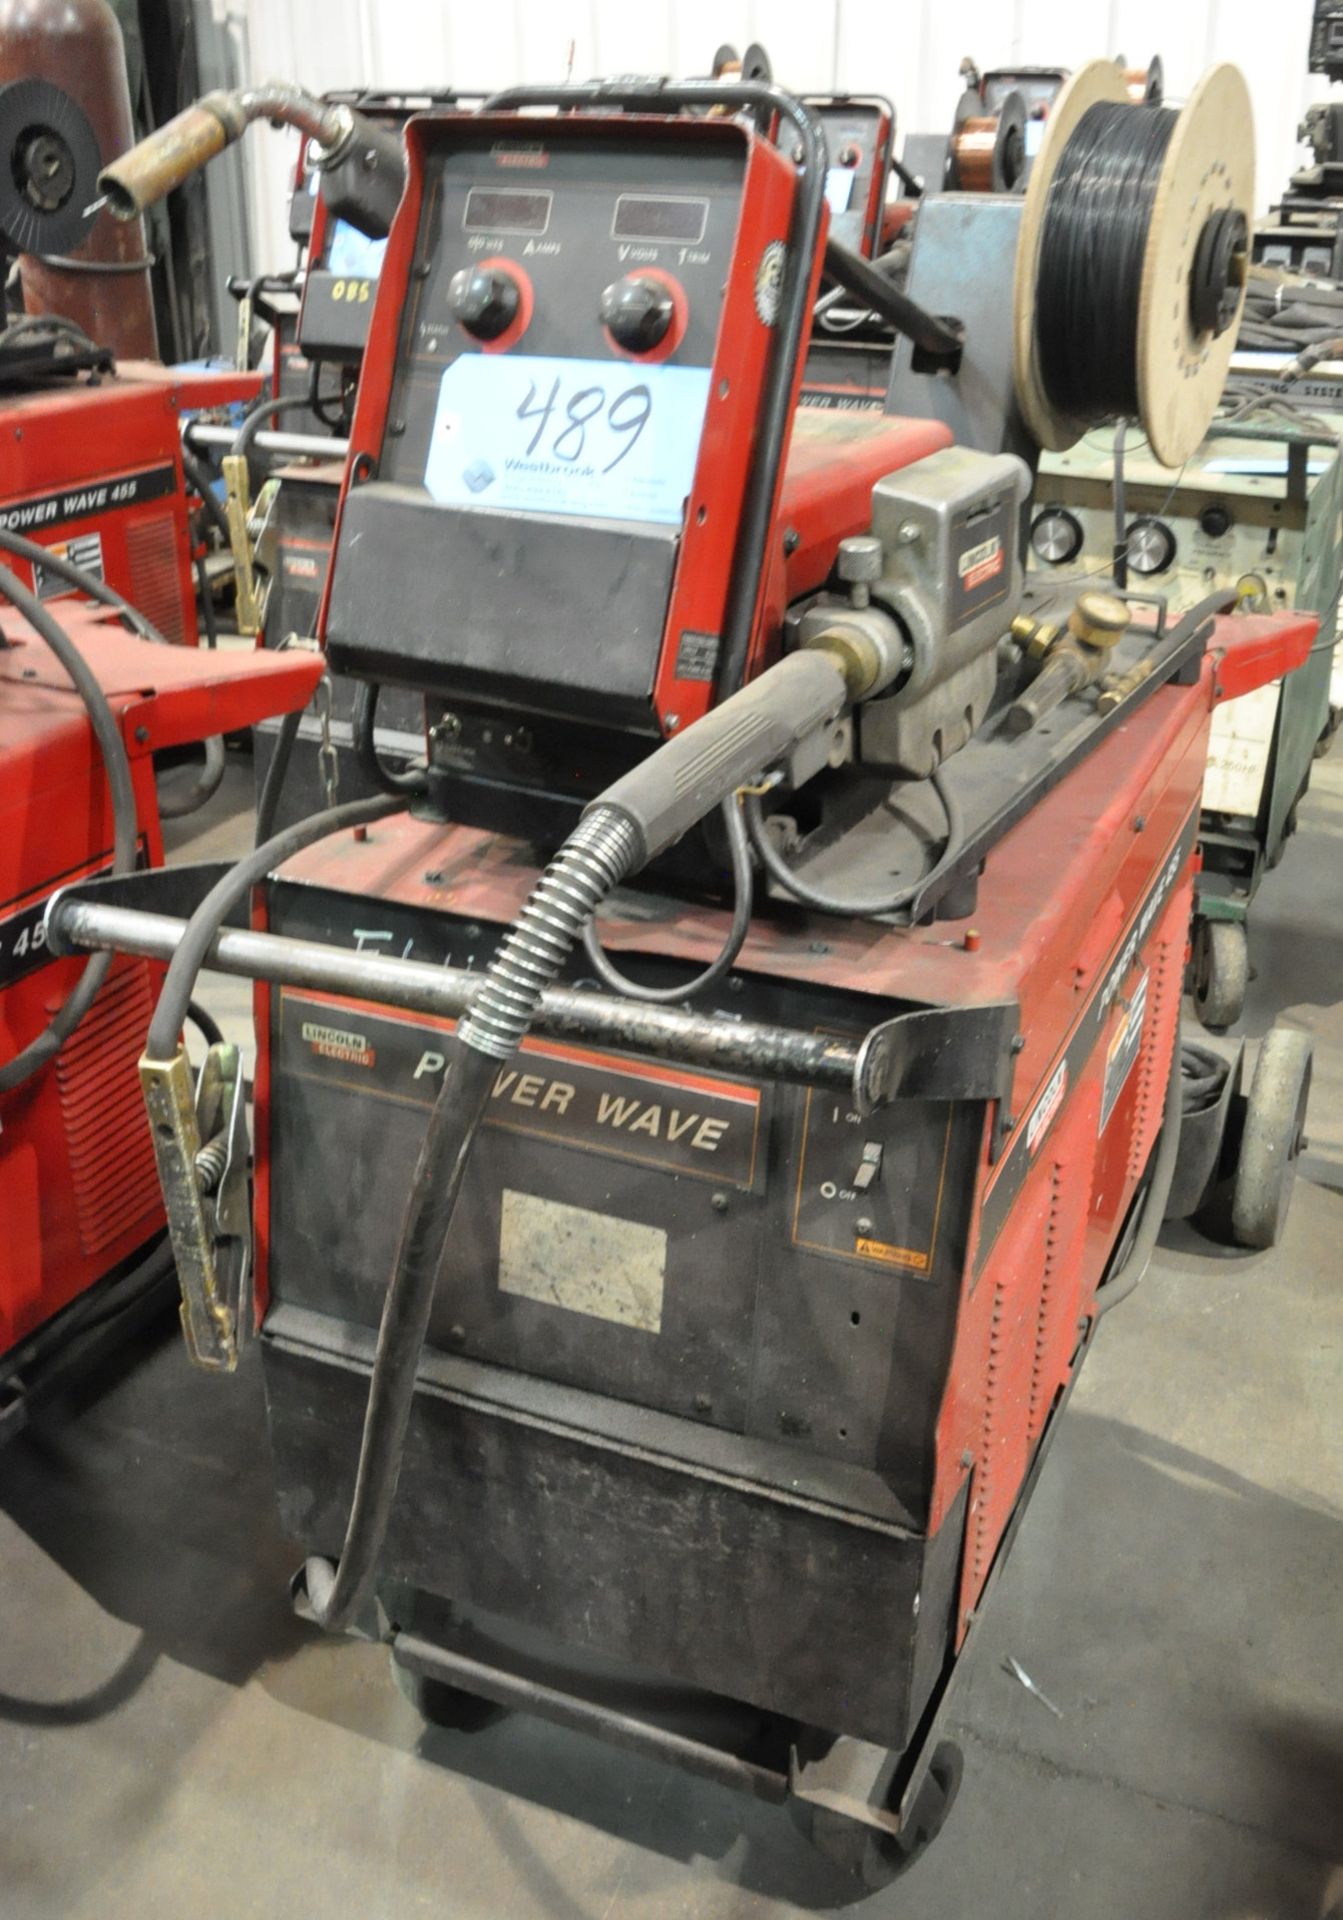 Lincoln Electric Power Wave 455, 450-Amp Capacity Arc Welding Power Source